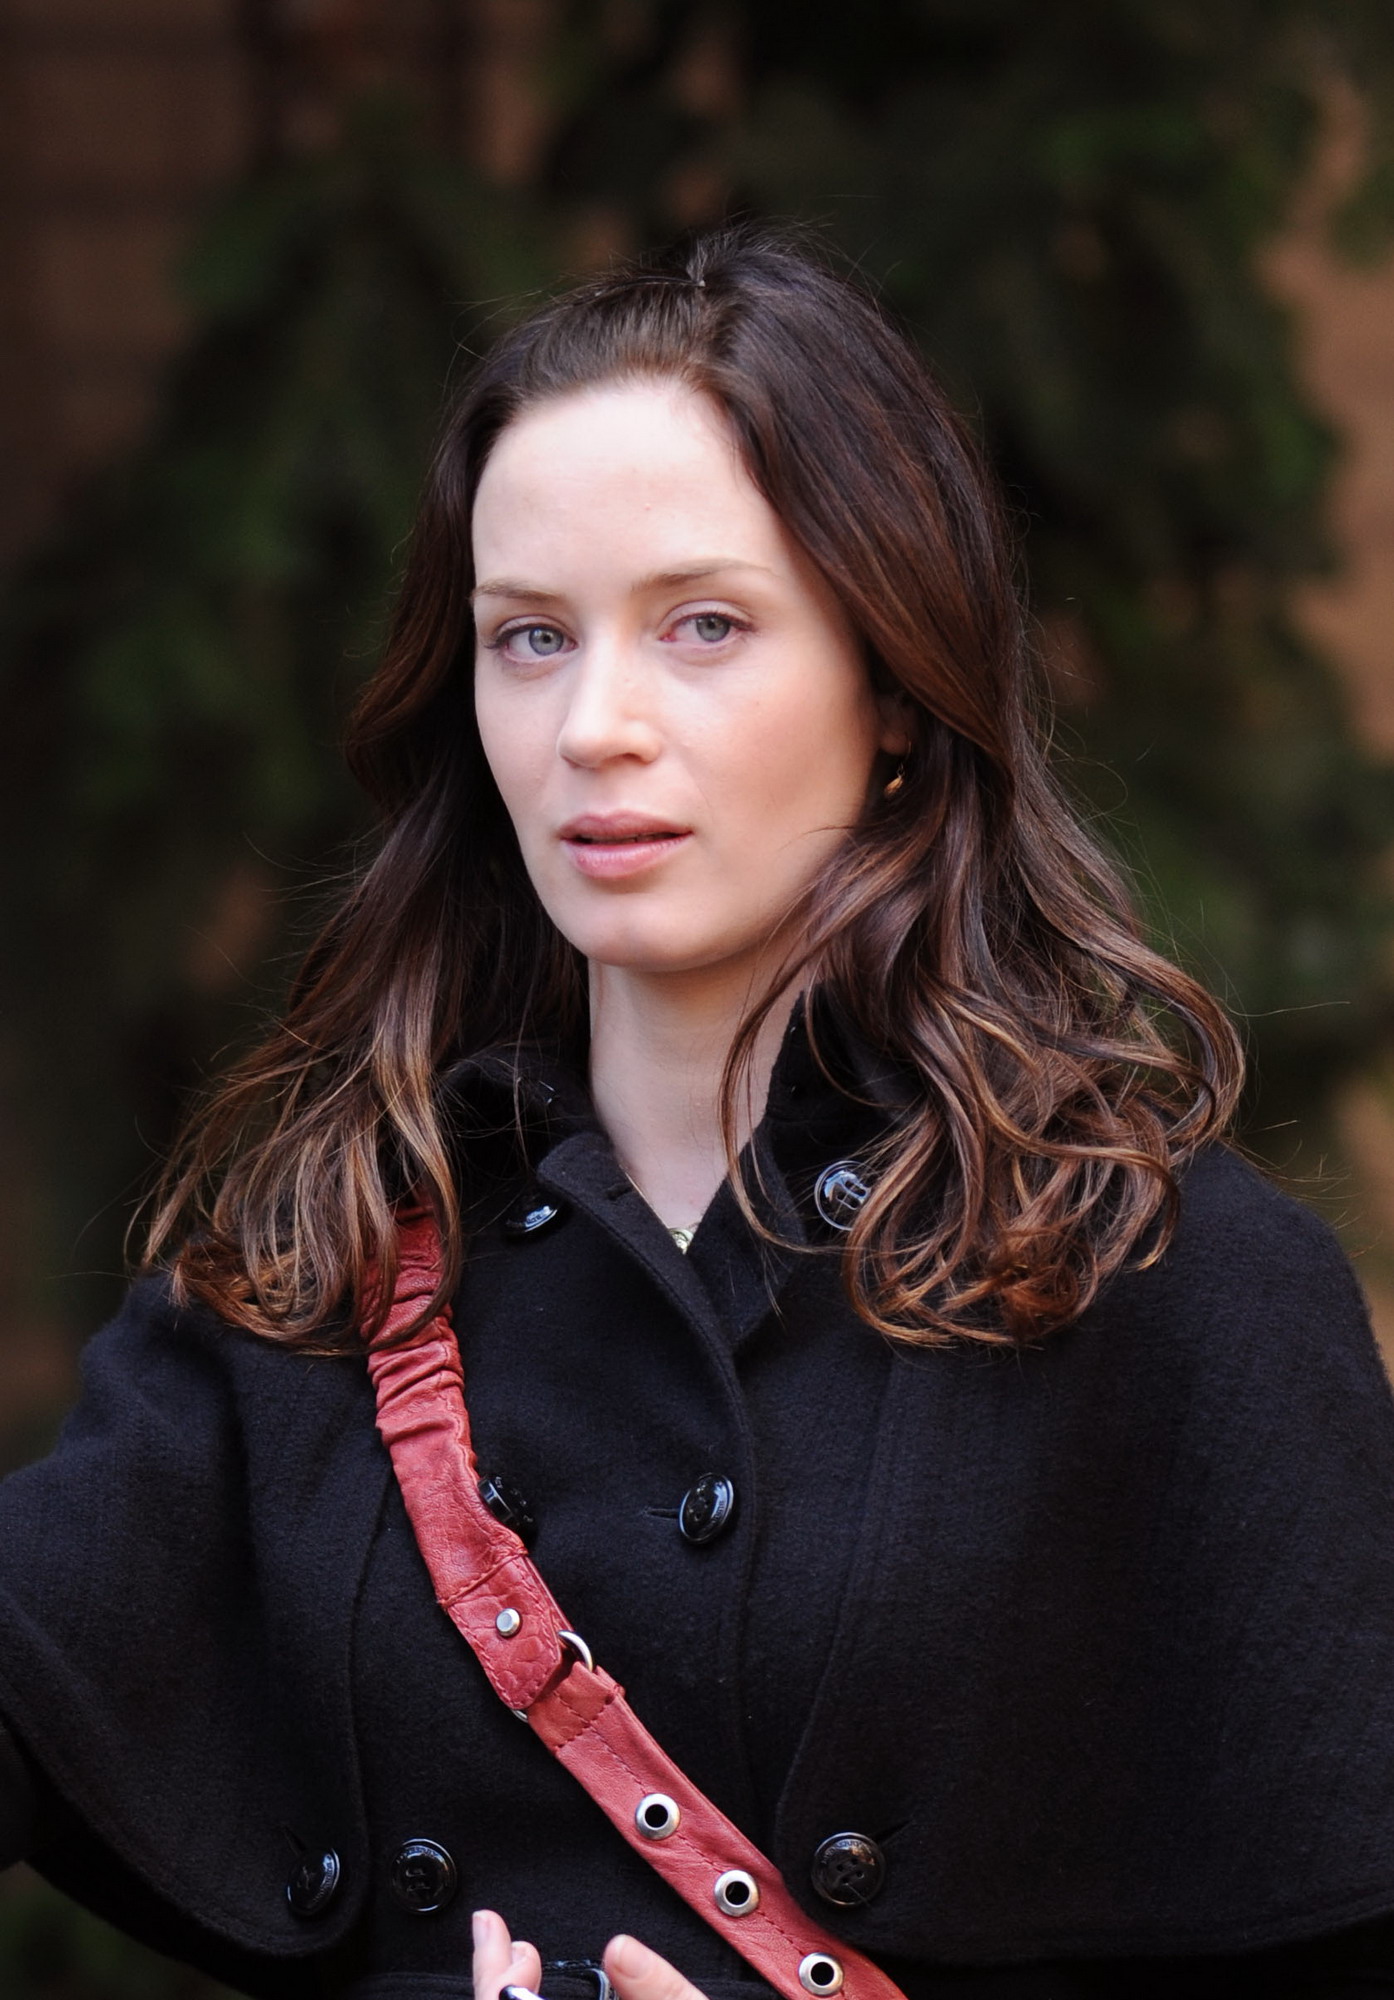 Emily Blunt photo gallery.